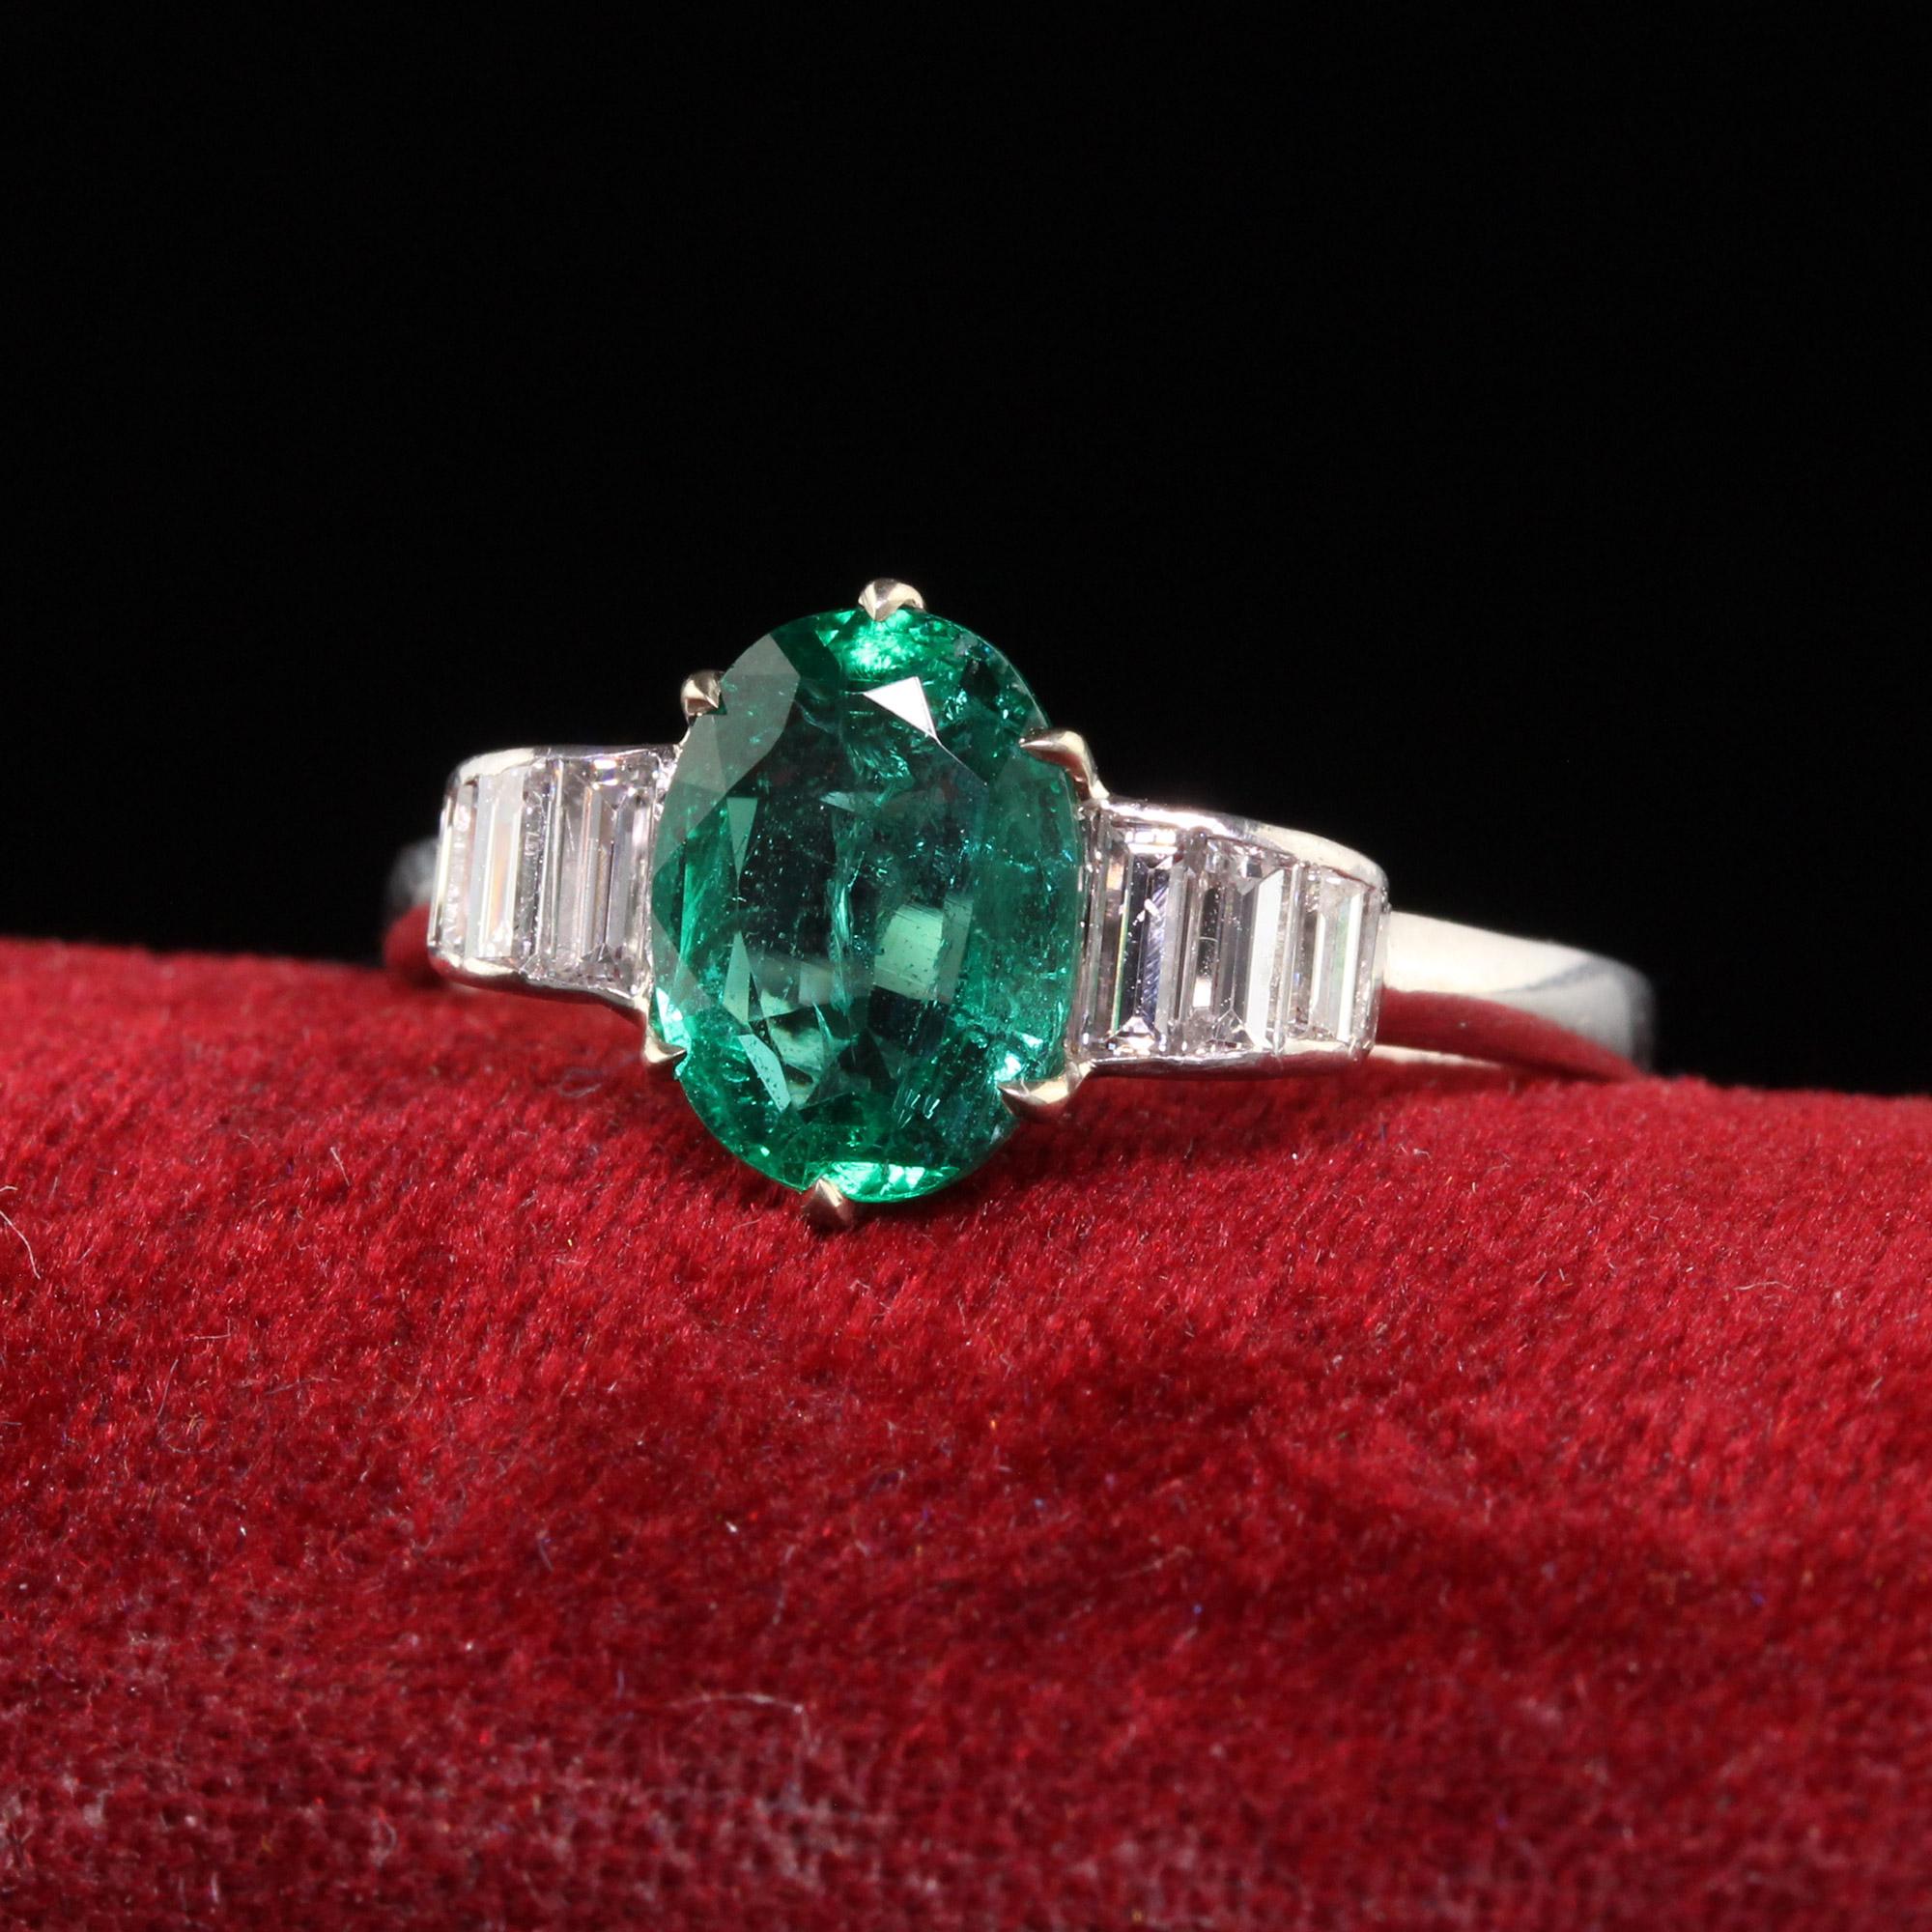 Beautiful Vintage Retro Platinum Natural Emerald and Diamond Engagement Ring. This gorgeous engagement ring is crafted in platinum. The center holds a natural oval cut emerald with a deep green saturation of color. The sides are custom cut baguettes